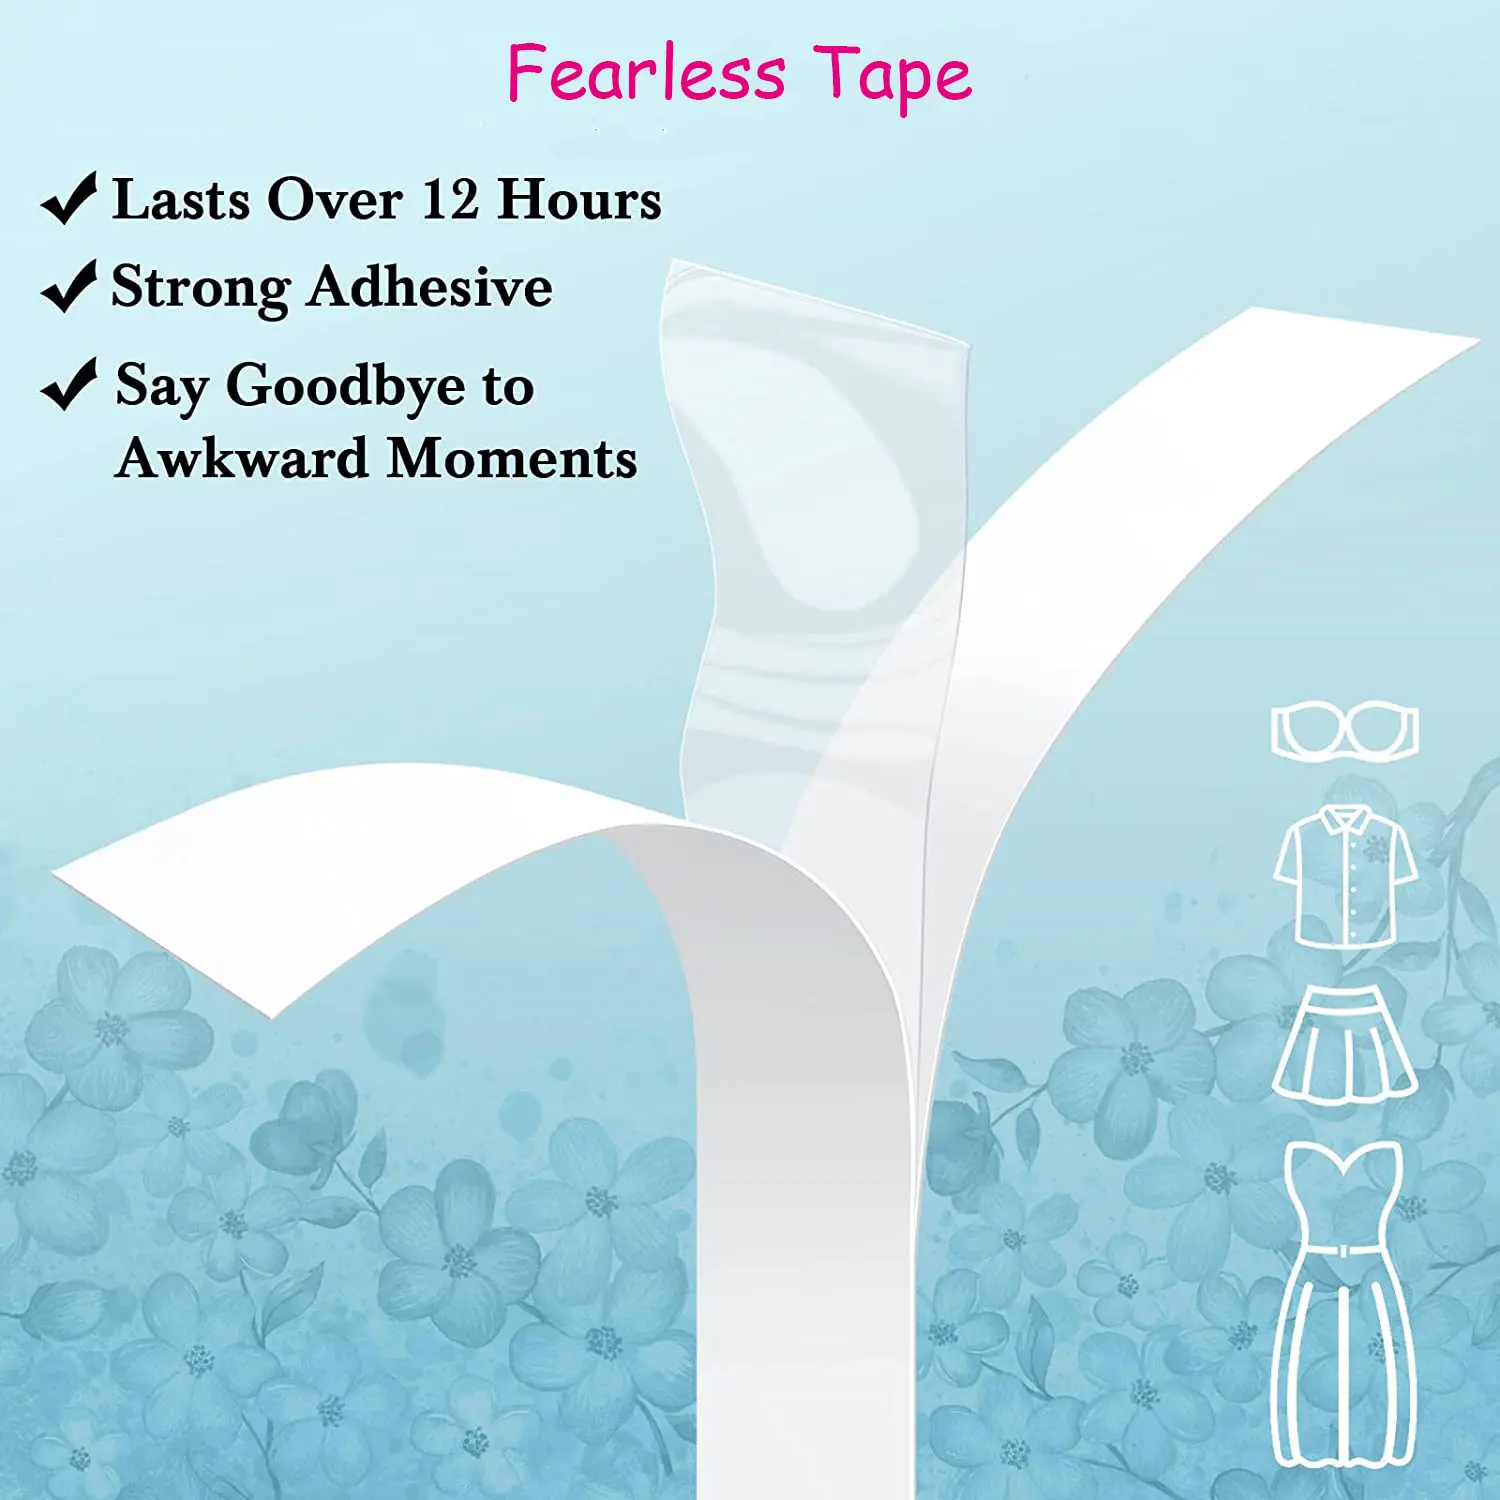 FearlessTape Double Sided Tape for Clothing and Body Transparent Clear Color for All Skin Shades Womens FashionDouble Sided Tape